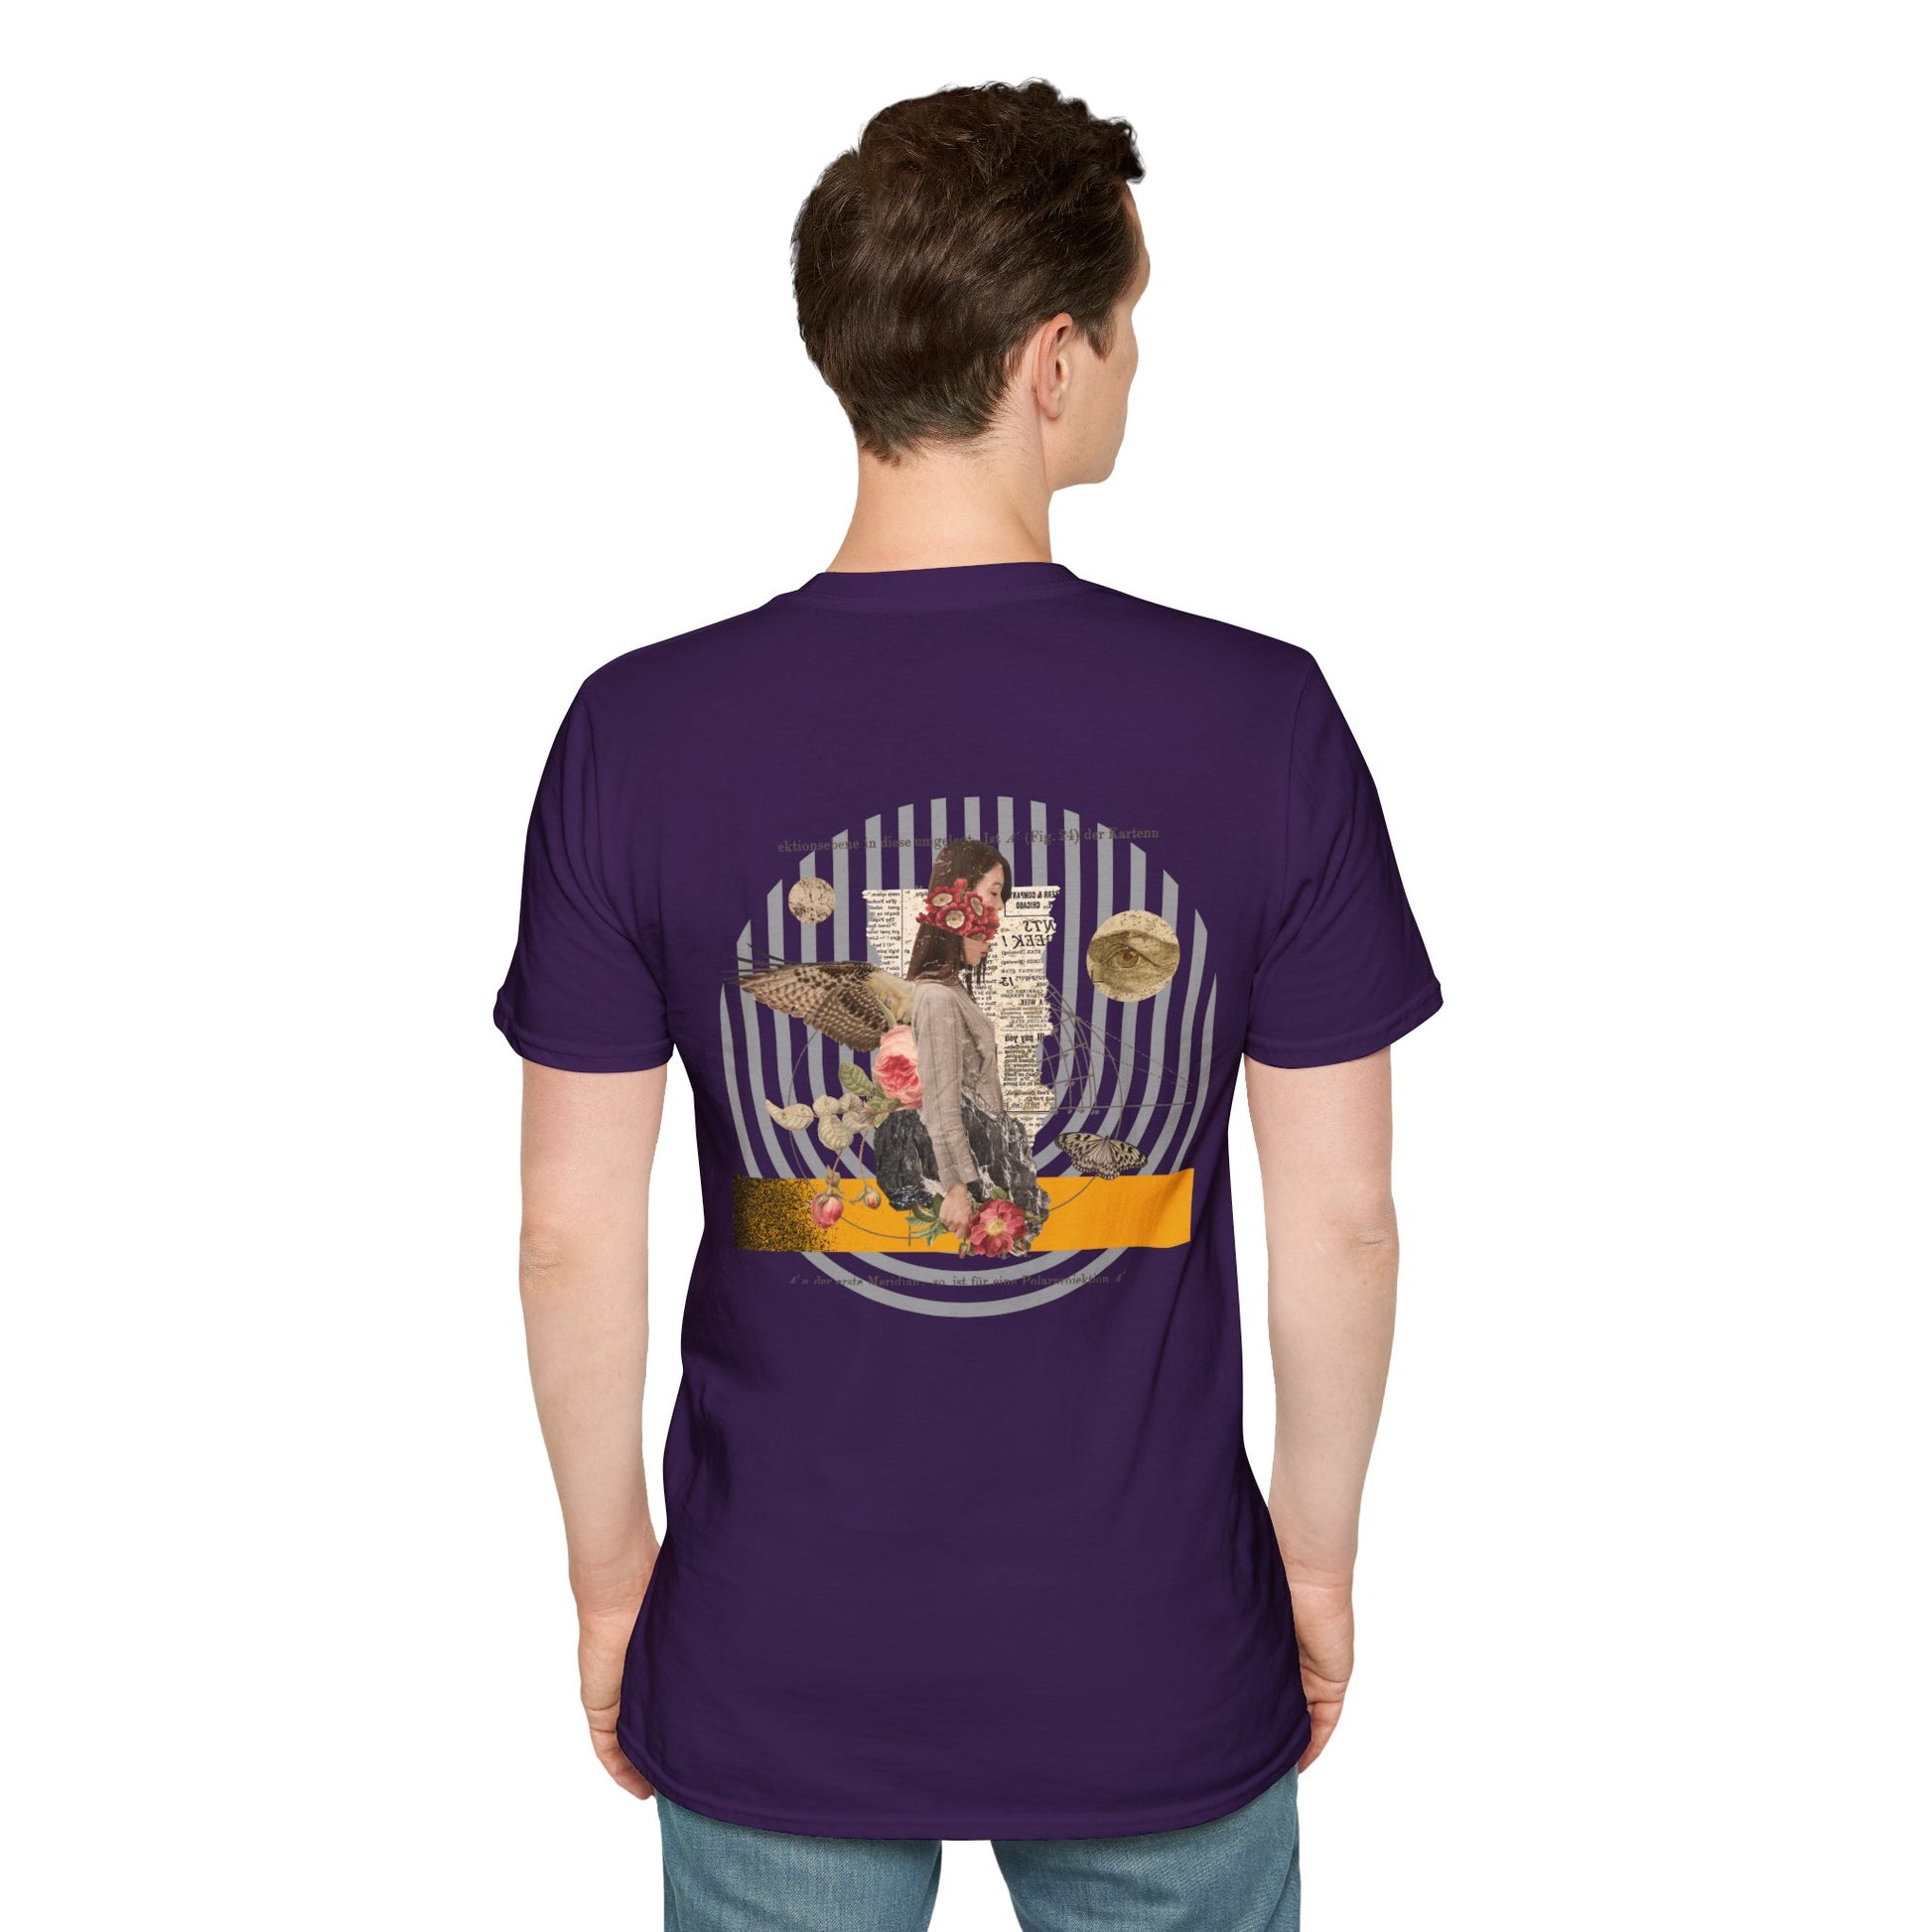 Violet T-shirt with a mysterious figure surrounded by butterflies and roses, with newspaper clippings and black stripes